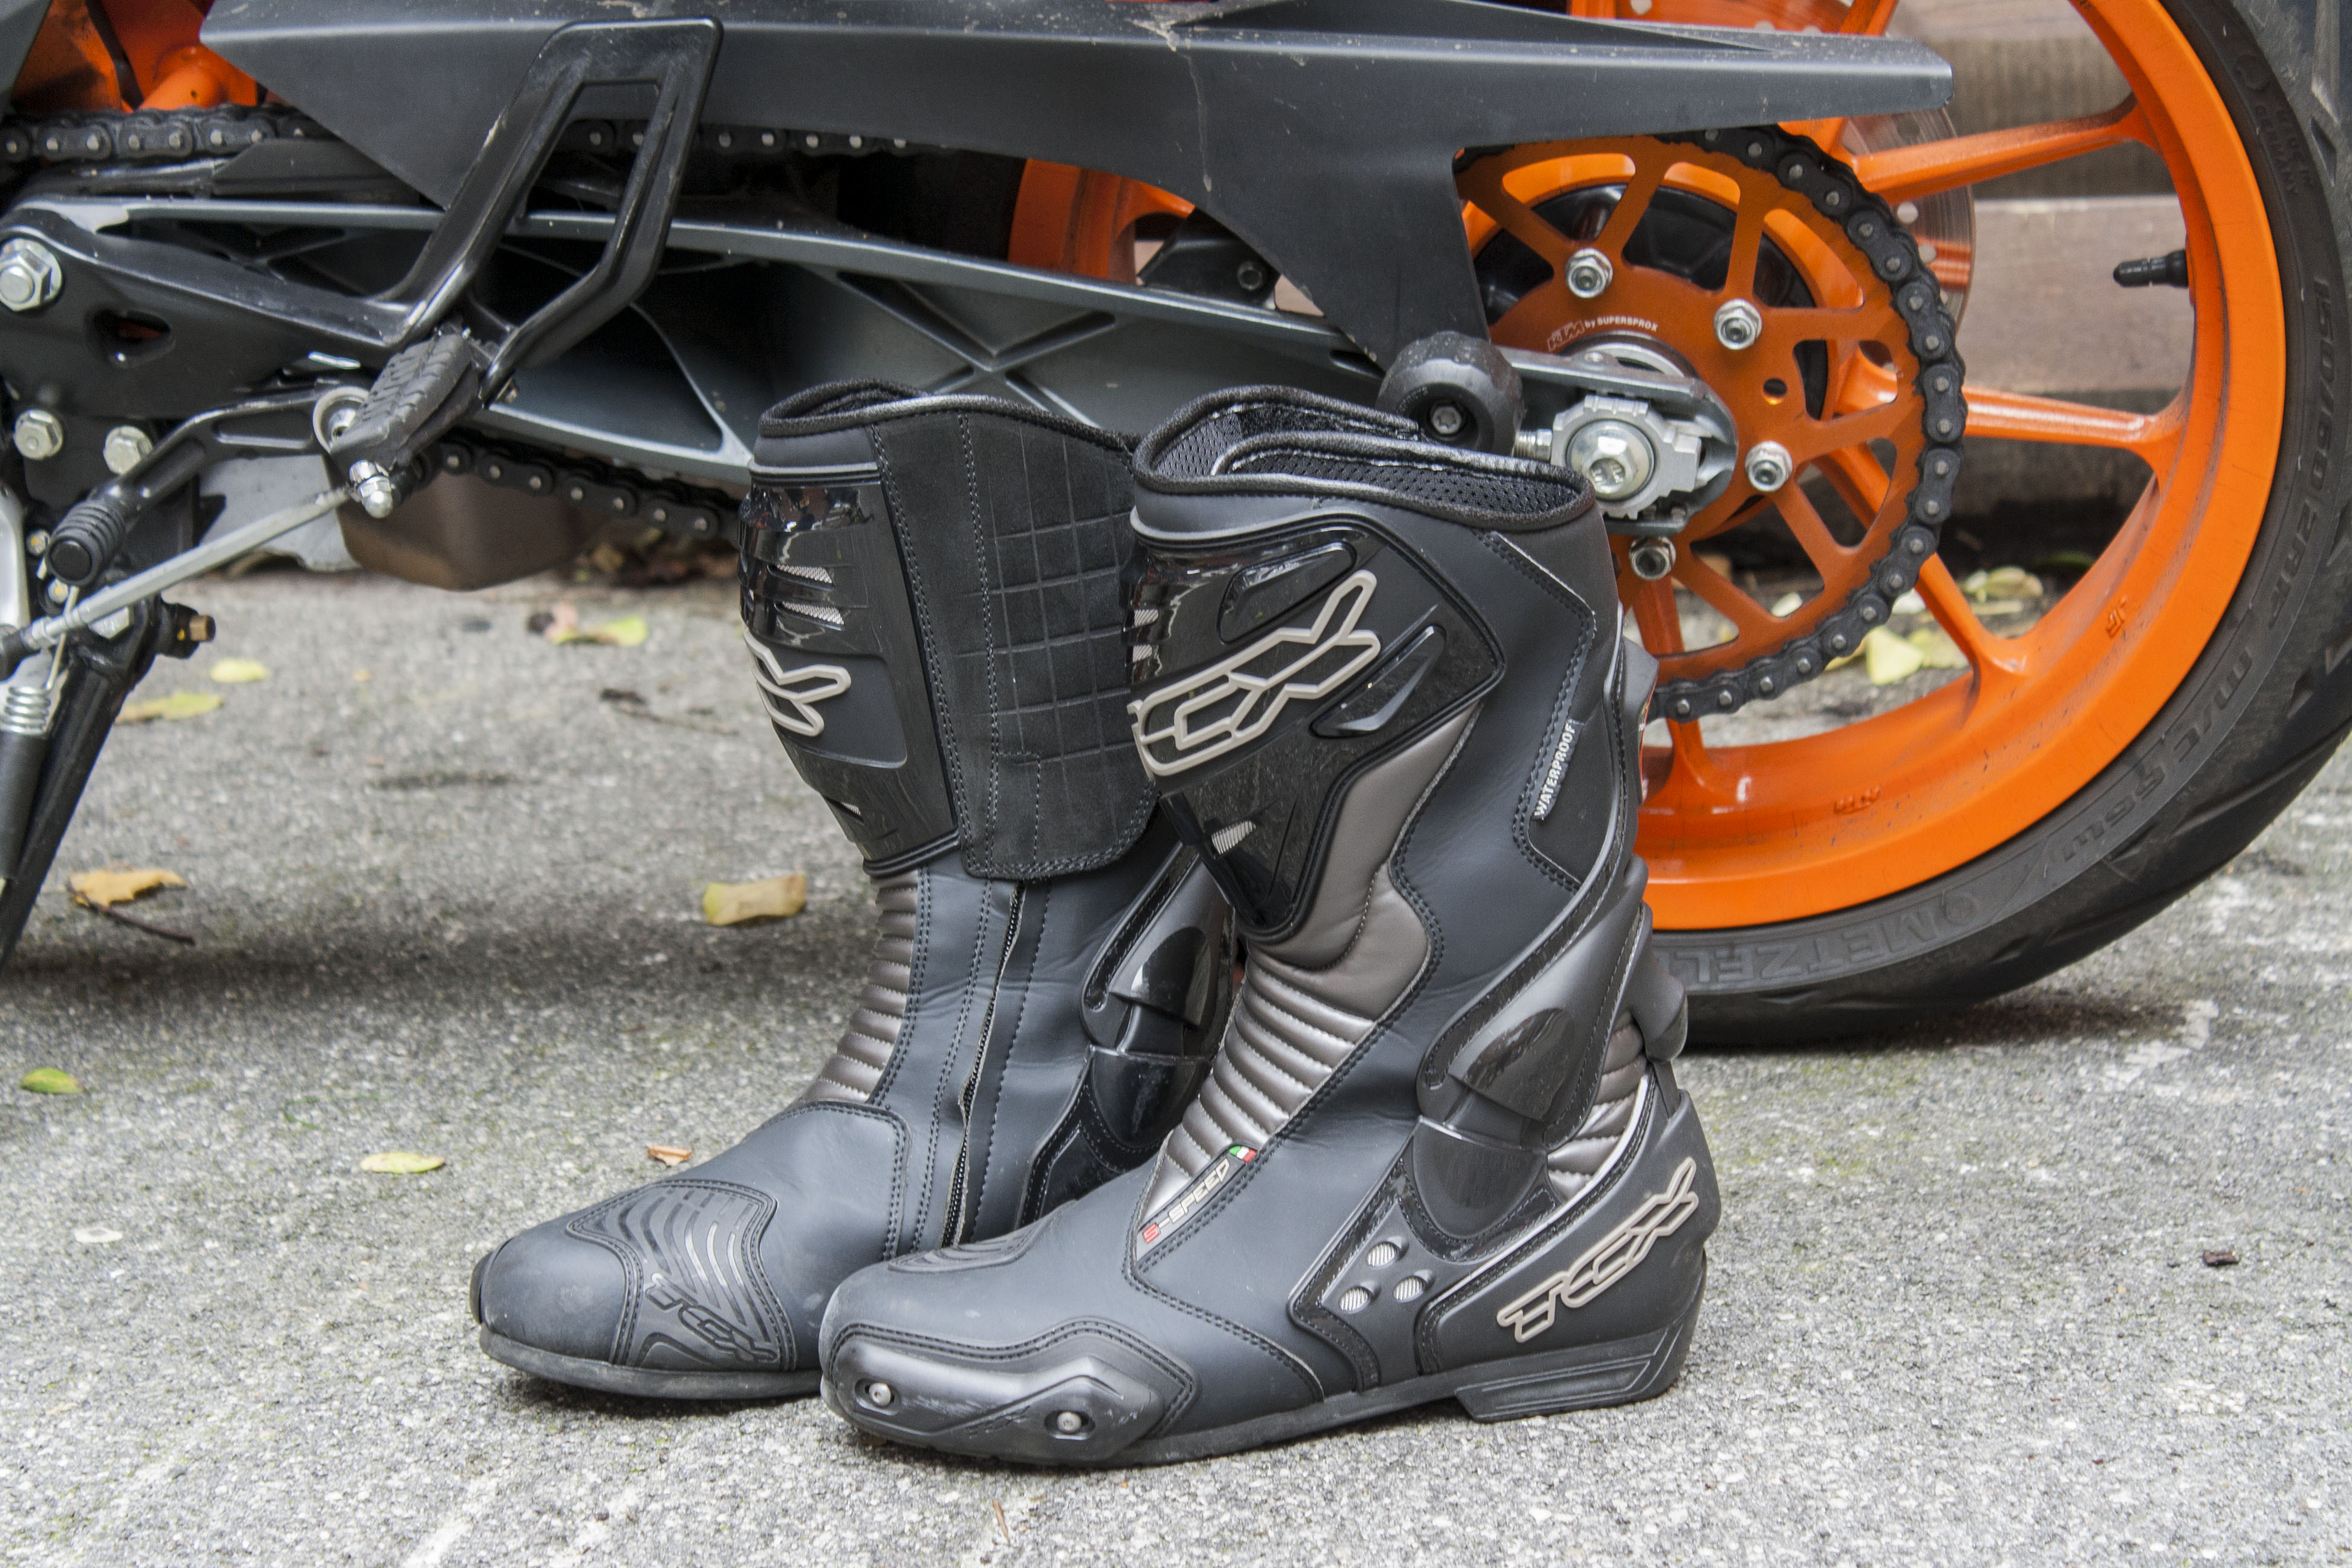 Review: TCX S-Speed Waterproof boots - £149.99